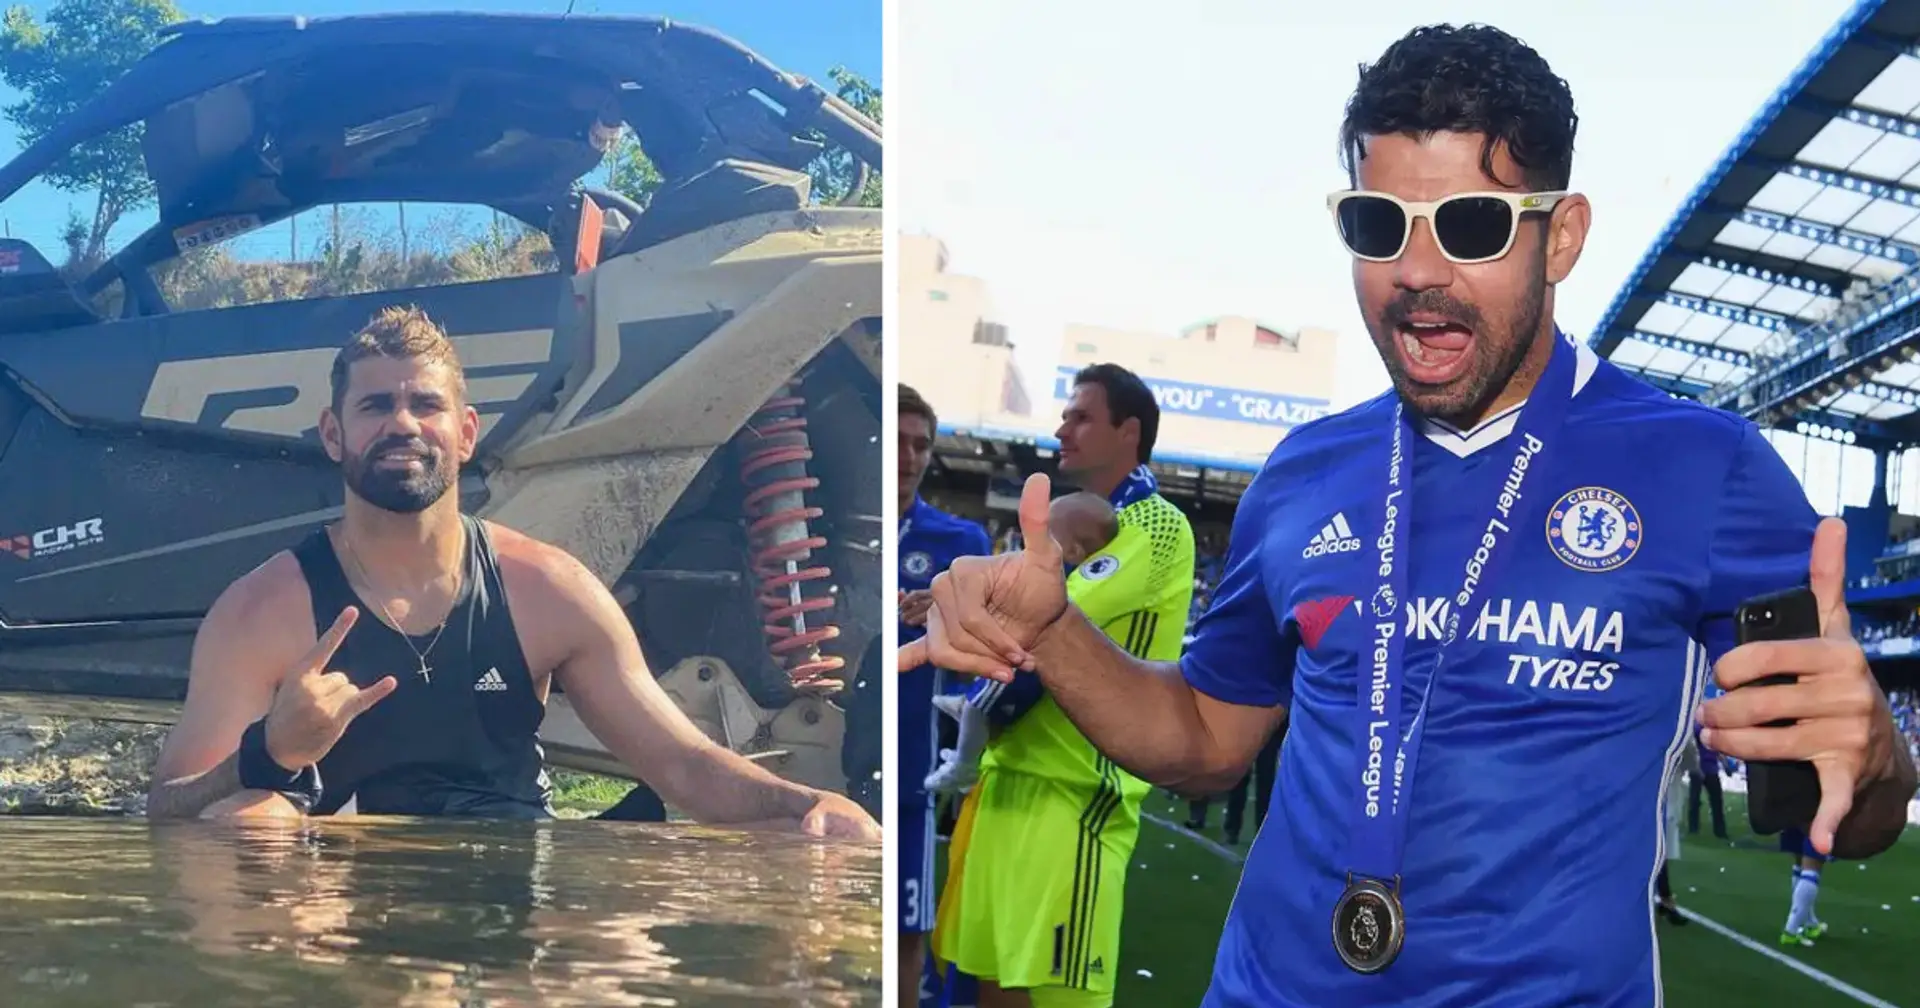 What is ex-Chelsea fan favourite Diego Costa doing now? - You asked, we answered